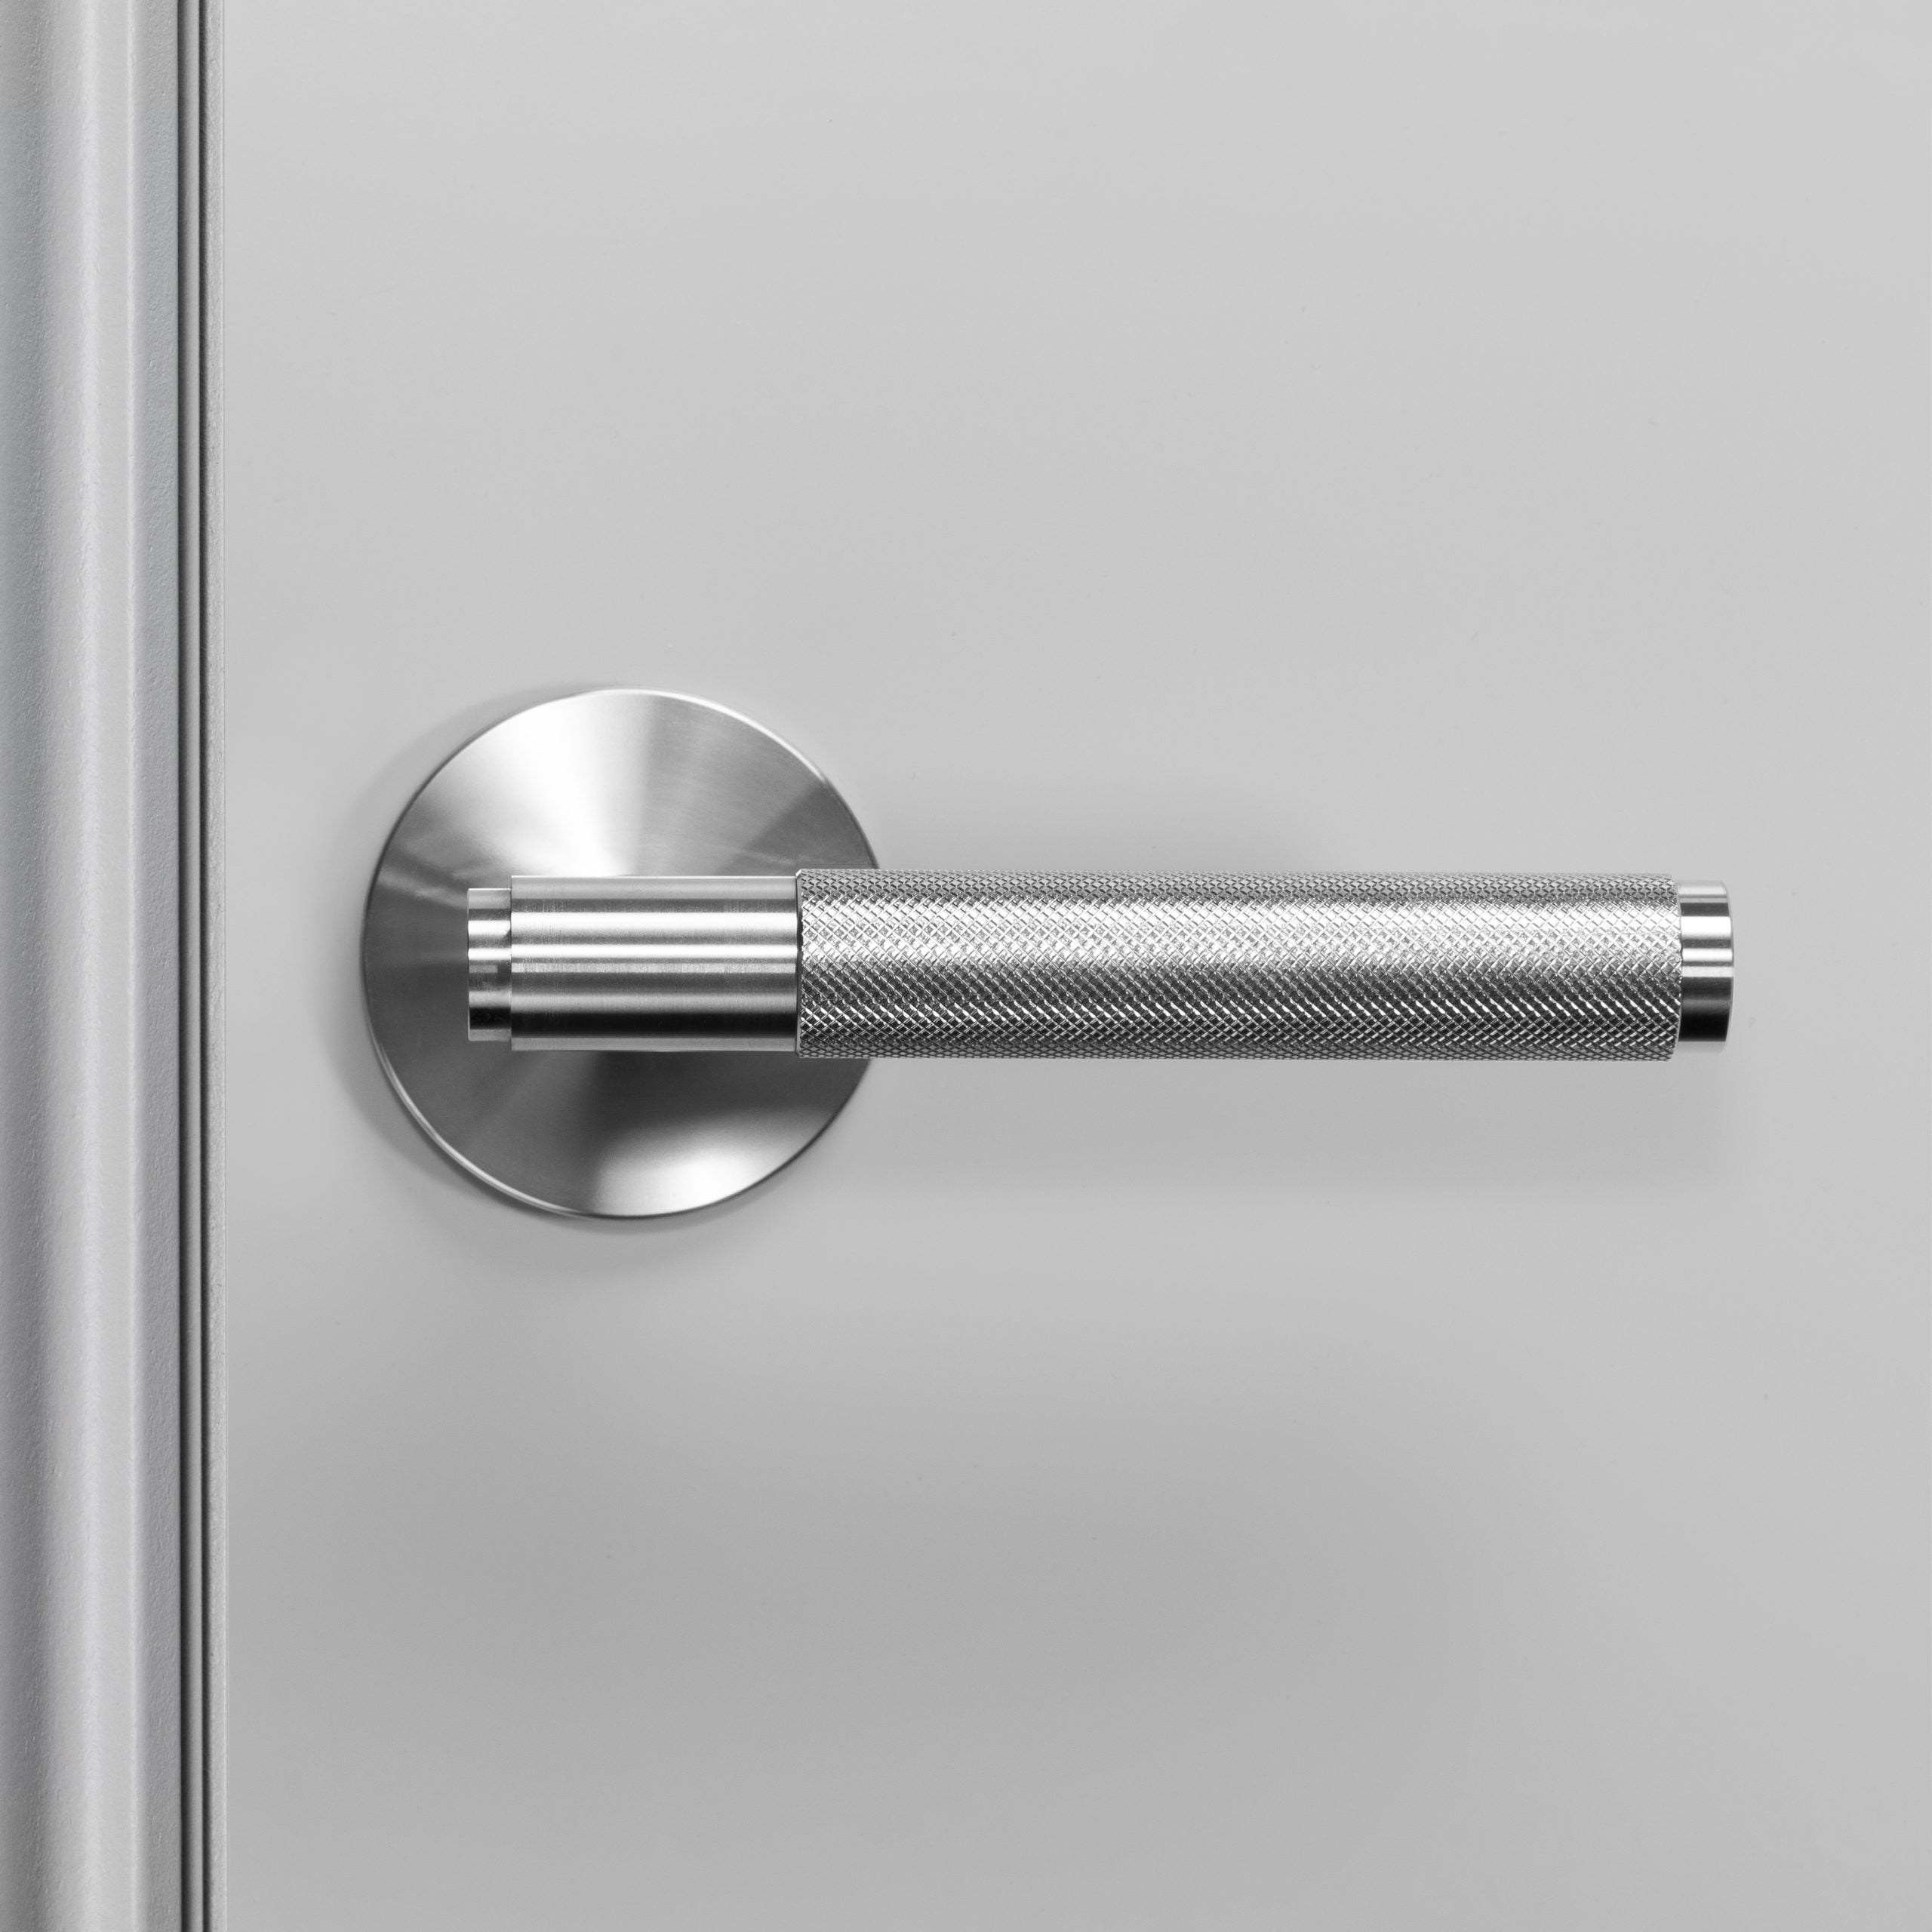 Buster + Punch Conventional Door Handle, Cross Design - PASSAGE TYPE Hardware Buster + Punch   